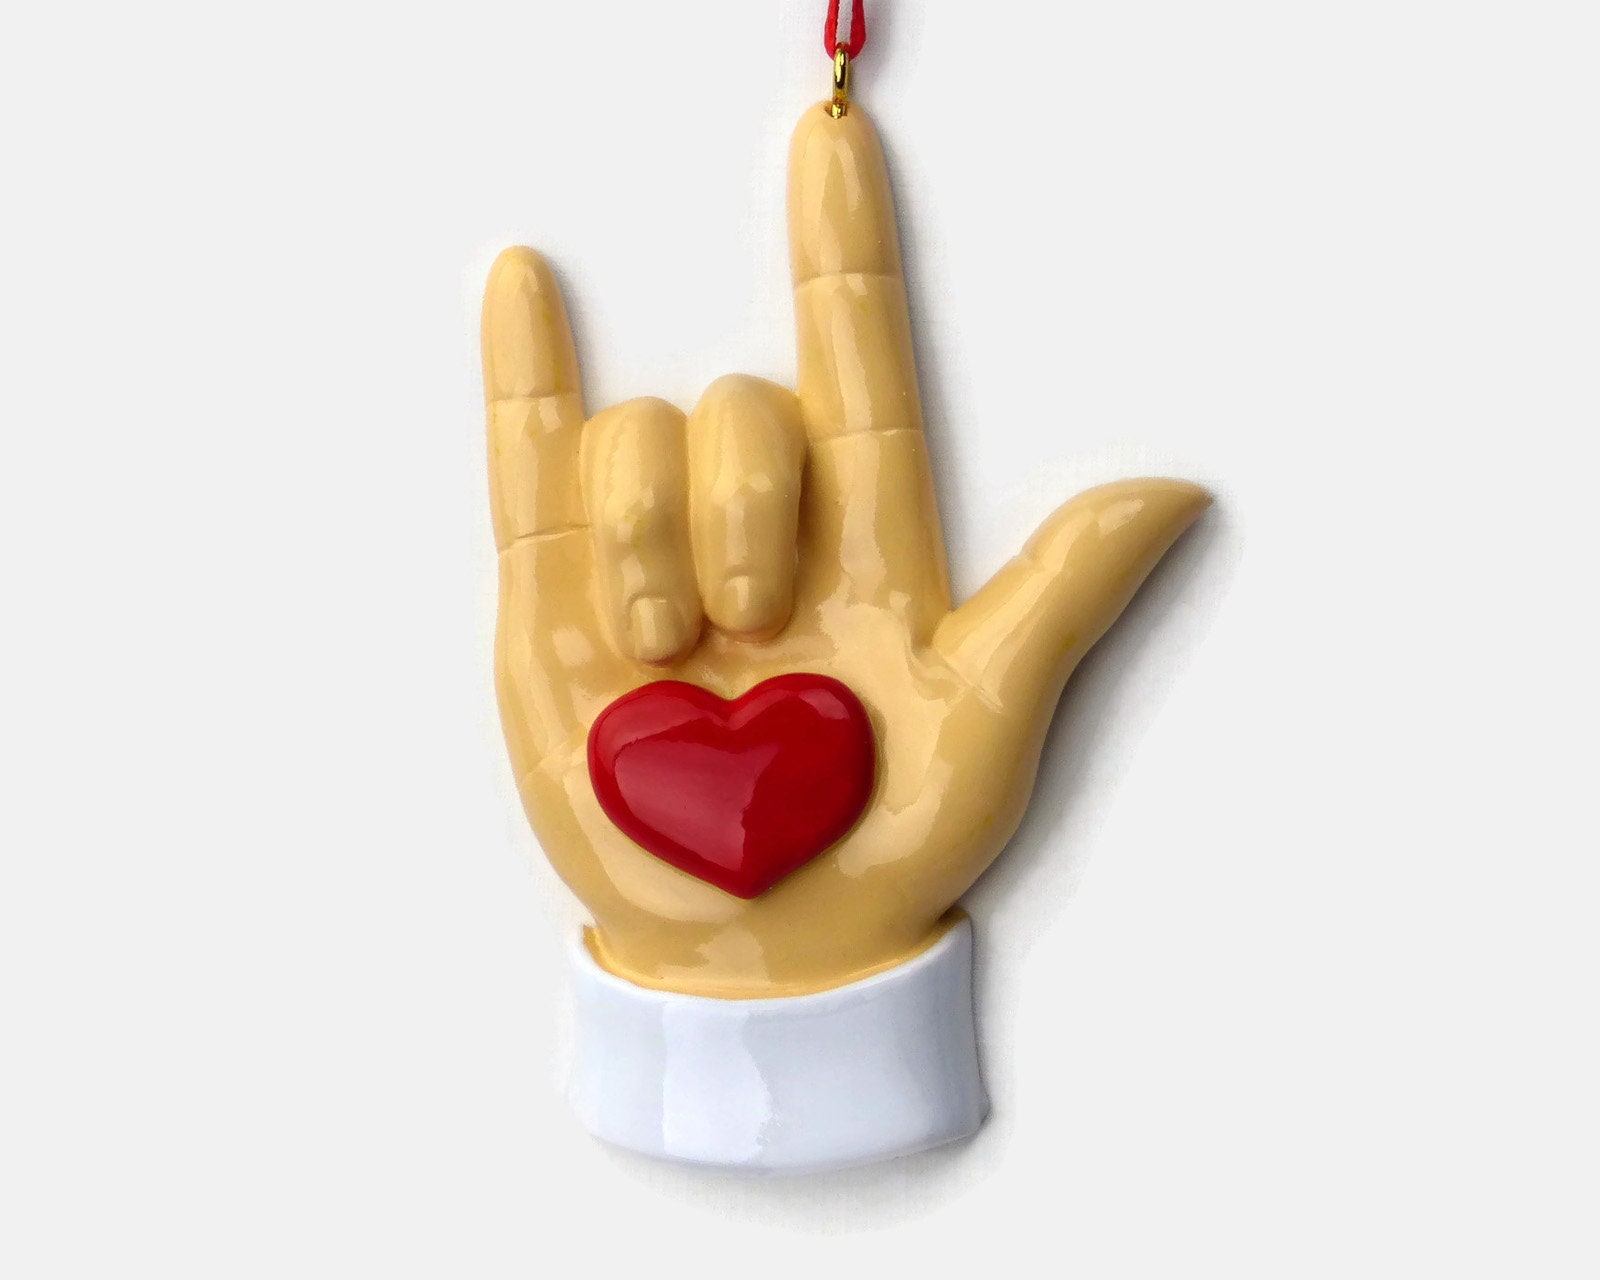 DISC SHAPES (LIKE AN M & M) 3.5 INCHES GLITTER ORNAMENTS WITH SIGN LANGUAGE  HAND  I LOVE YOU (WHITE GLITTER ) - DeafGifts, LLC